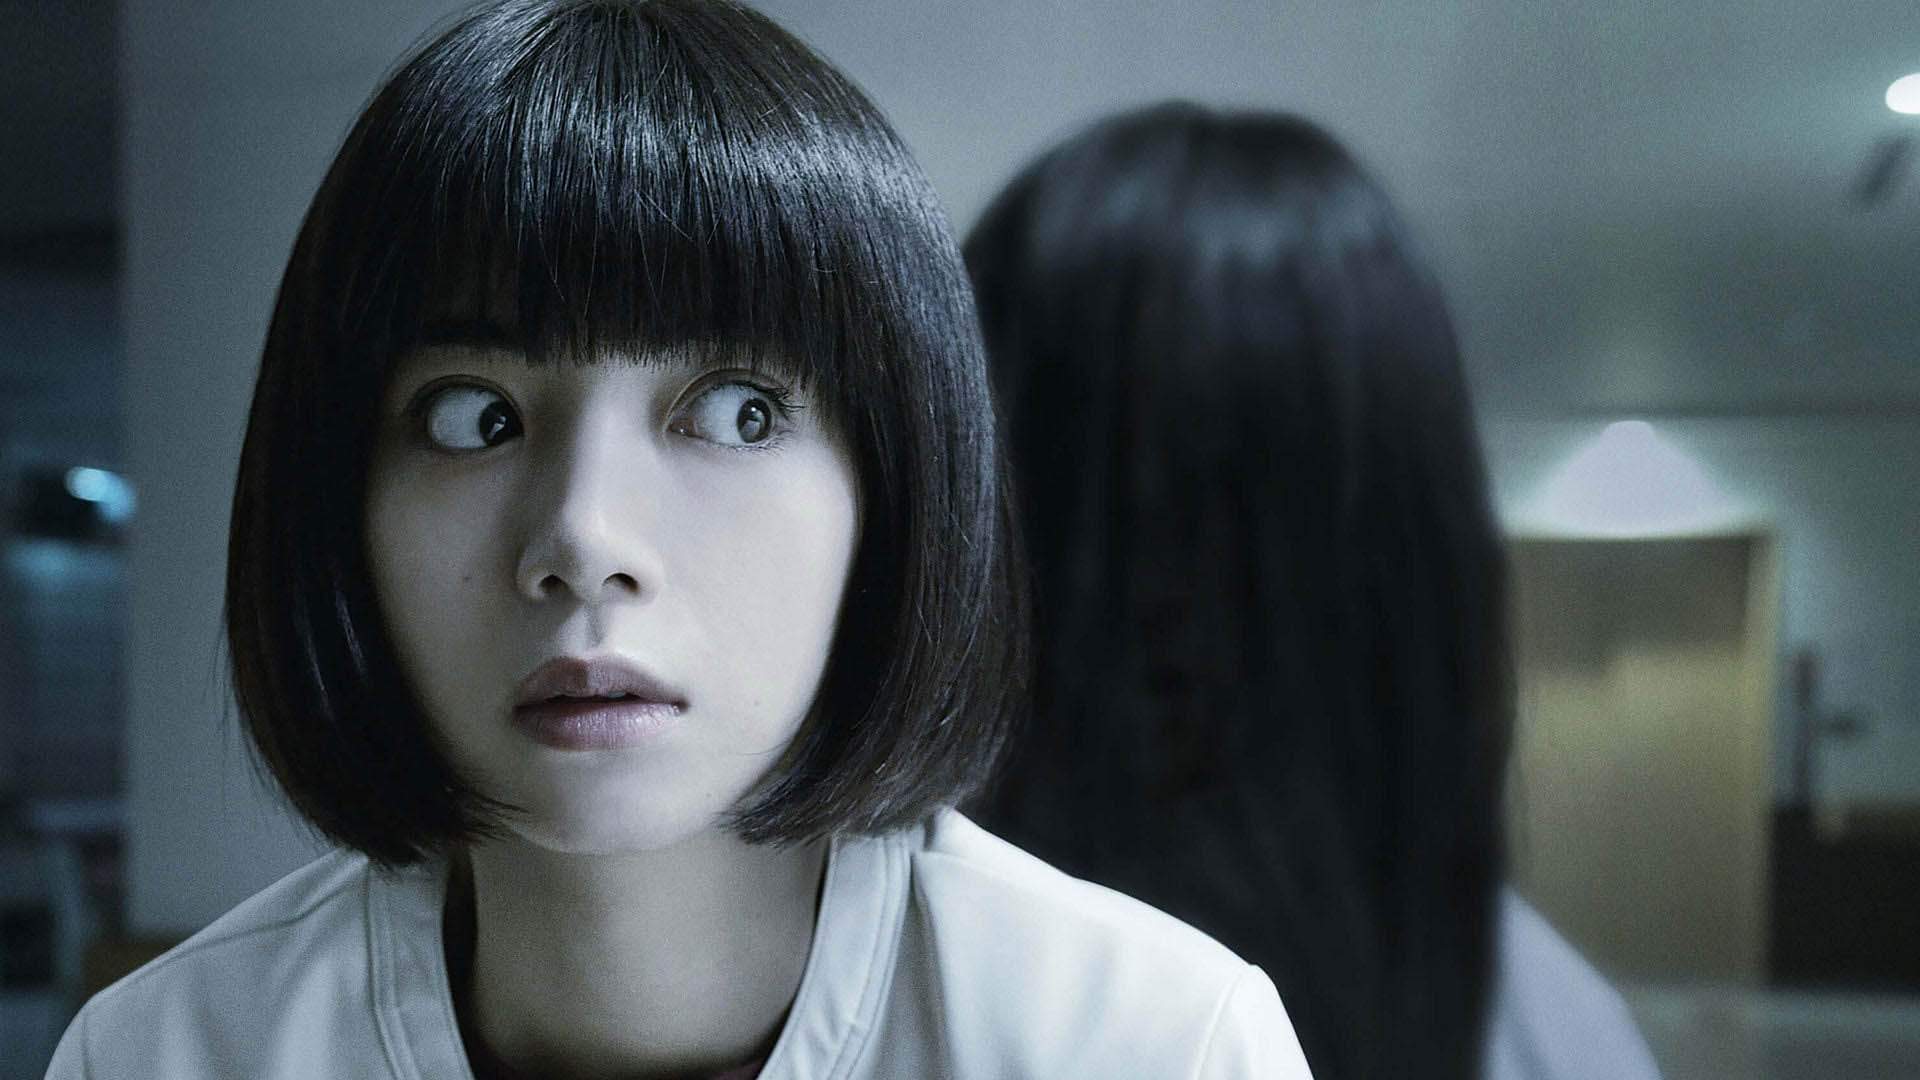 The Original and Unnerving Japanese 'Ring' Franchise Is Back to Creep You Out All Over Again